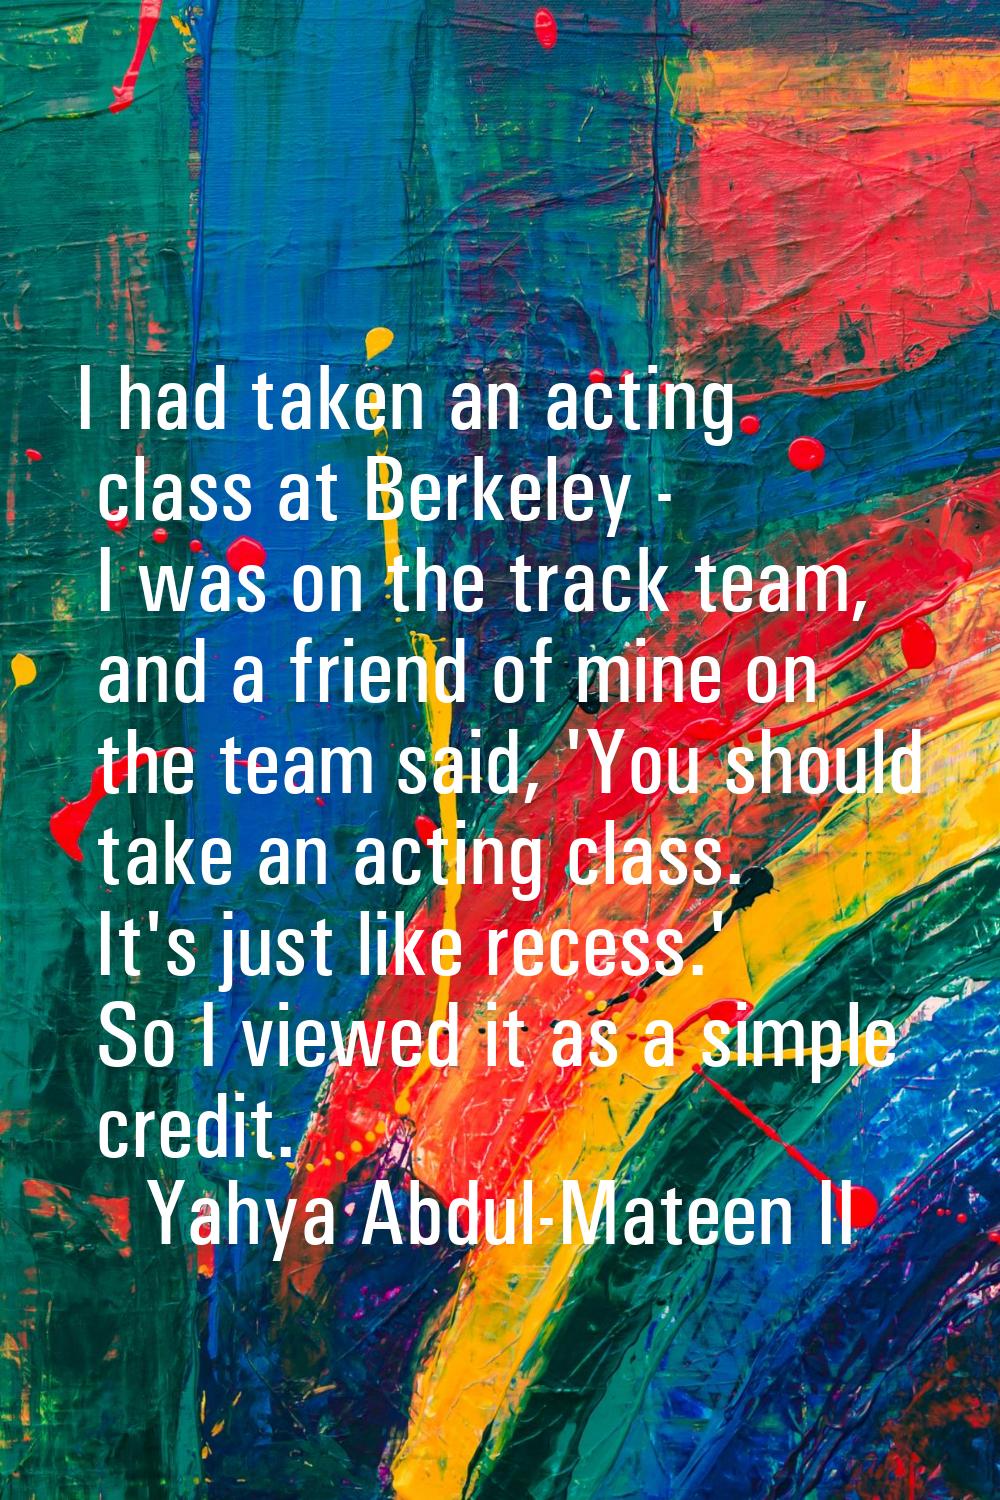 I had taken an acting class at Berkeley - I was on the track team, and a friend of mine on the team